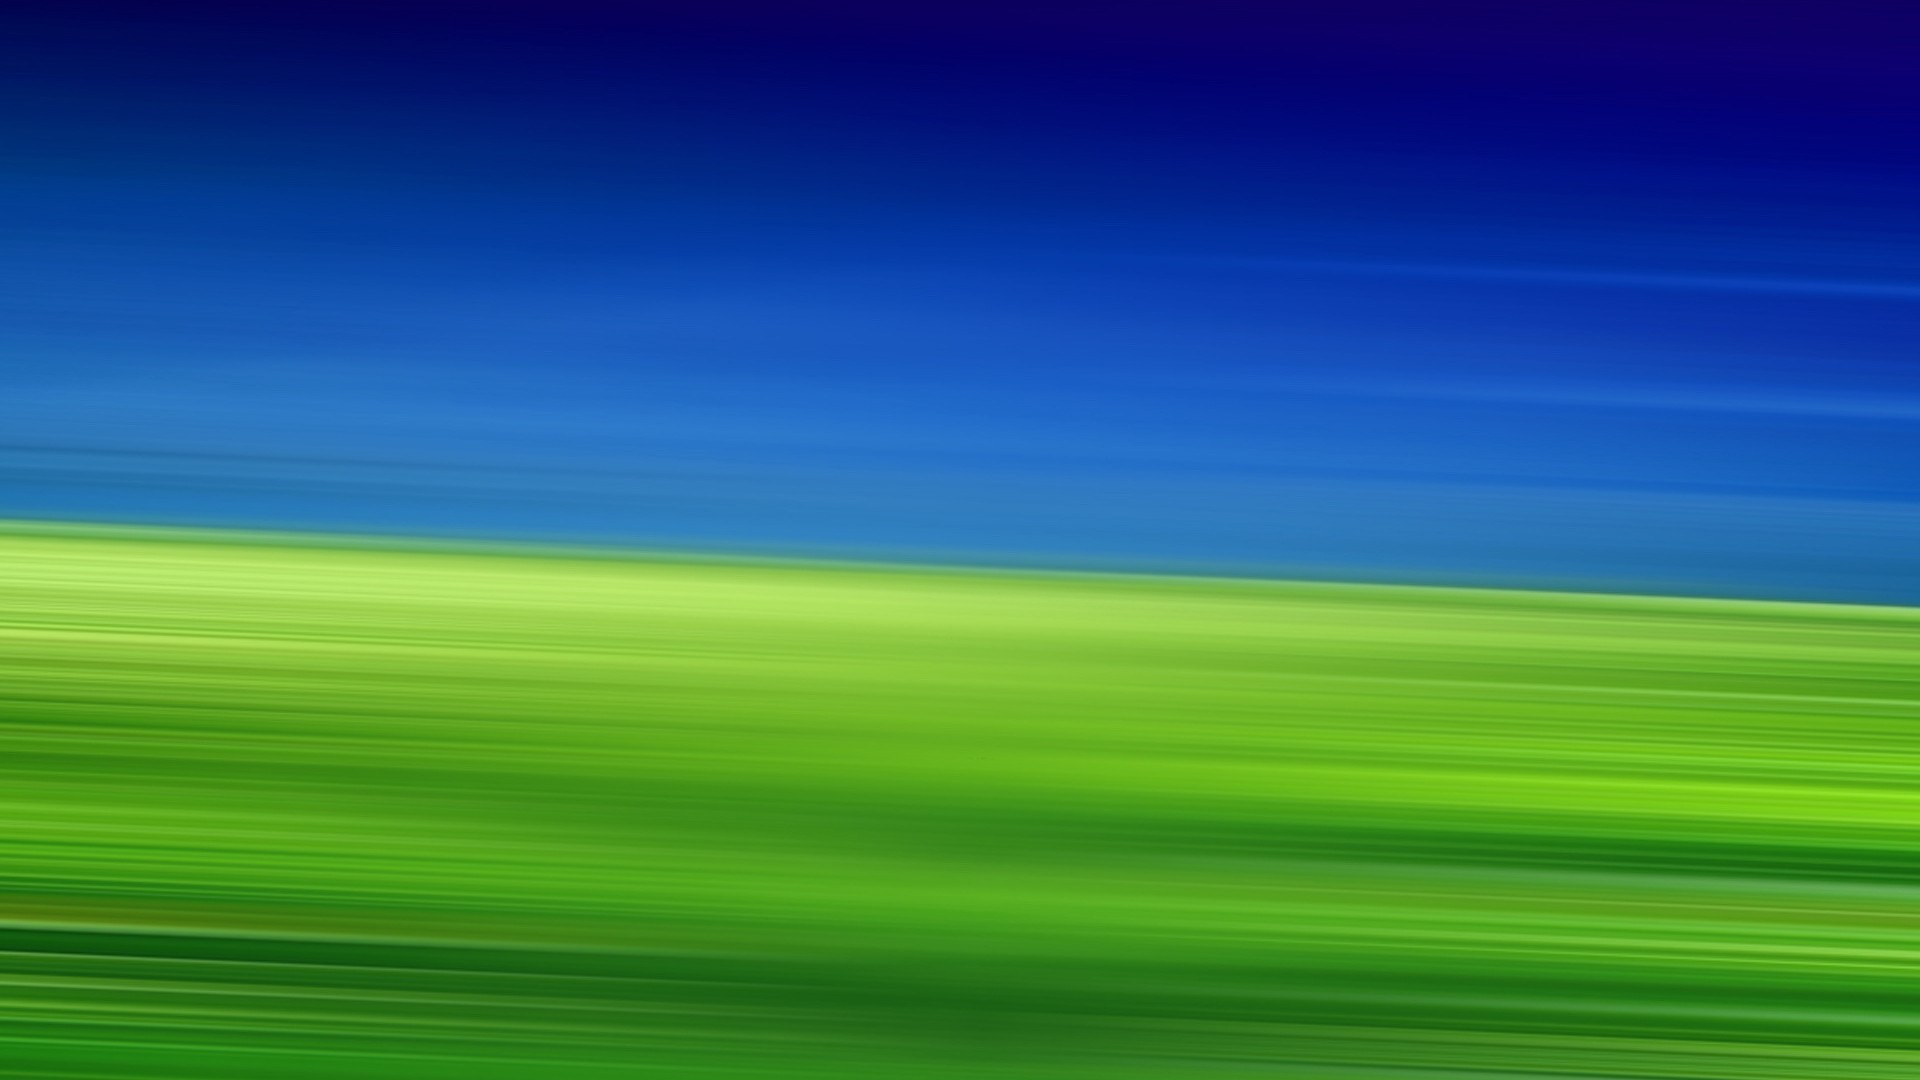 Wallpaper Blue and Green HD with image resolution 1920x1080 pixel. You can make this wallpaper for your Desktop Computer Backgrounds, Mac Wallpapers, Android Lock screen or iPhone Screensavers